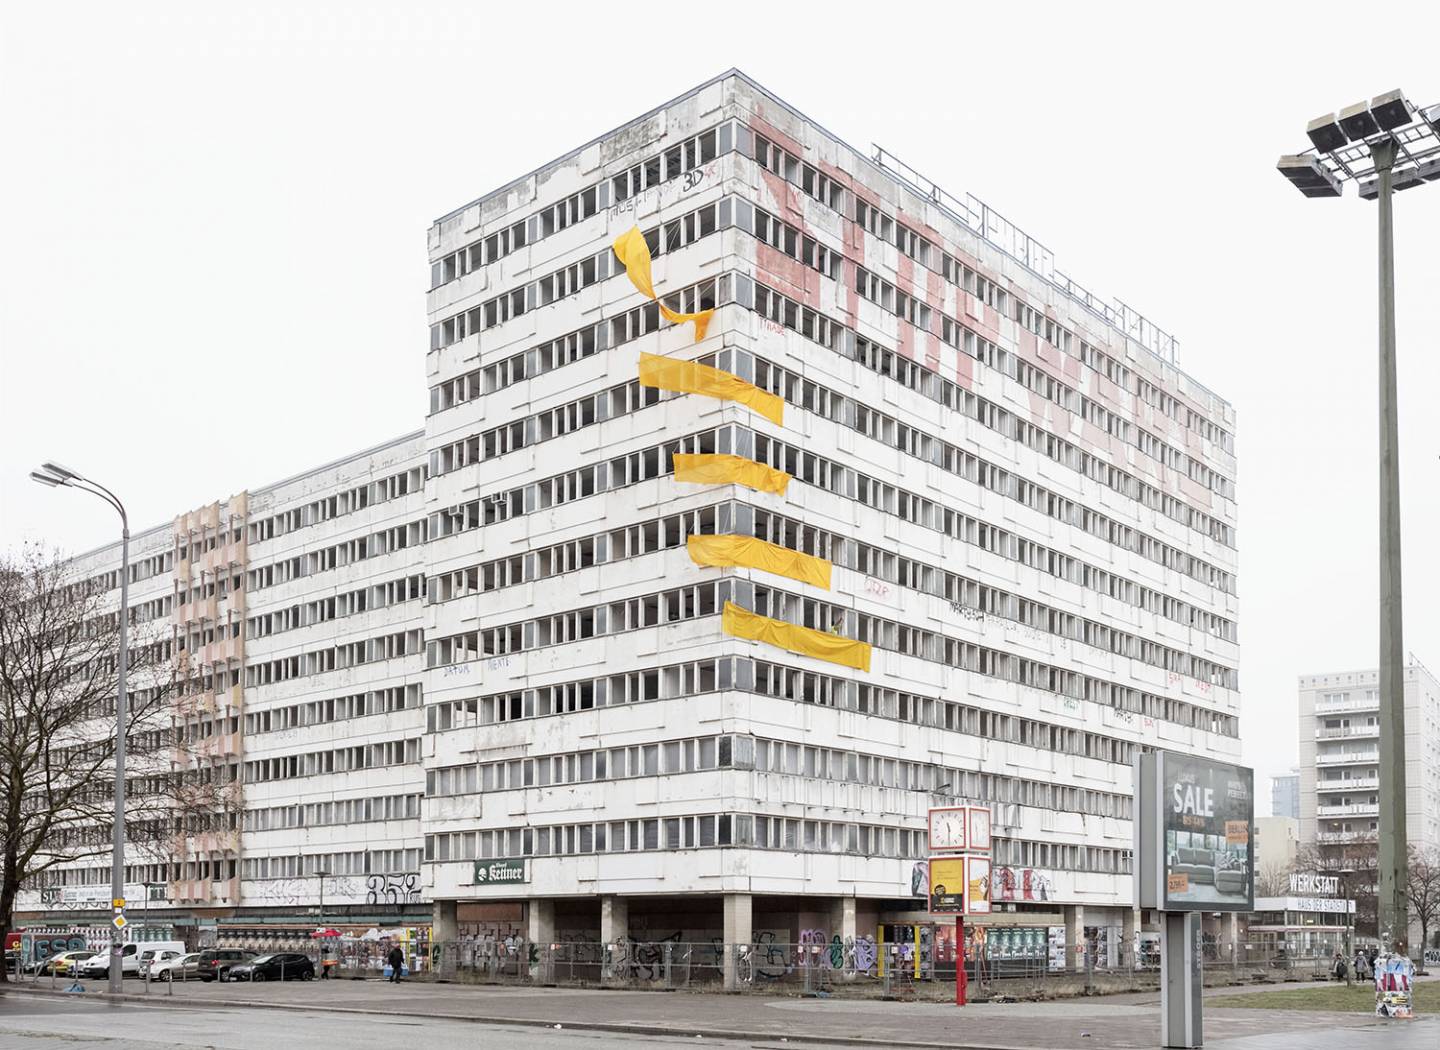 Big GDR building with Stop Wars sign and yellow flags.